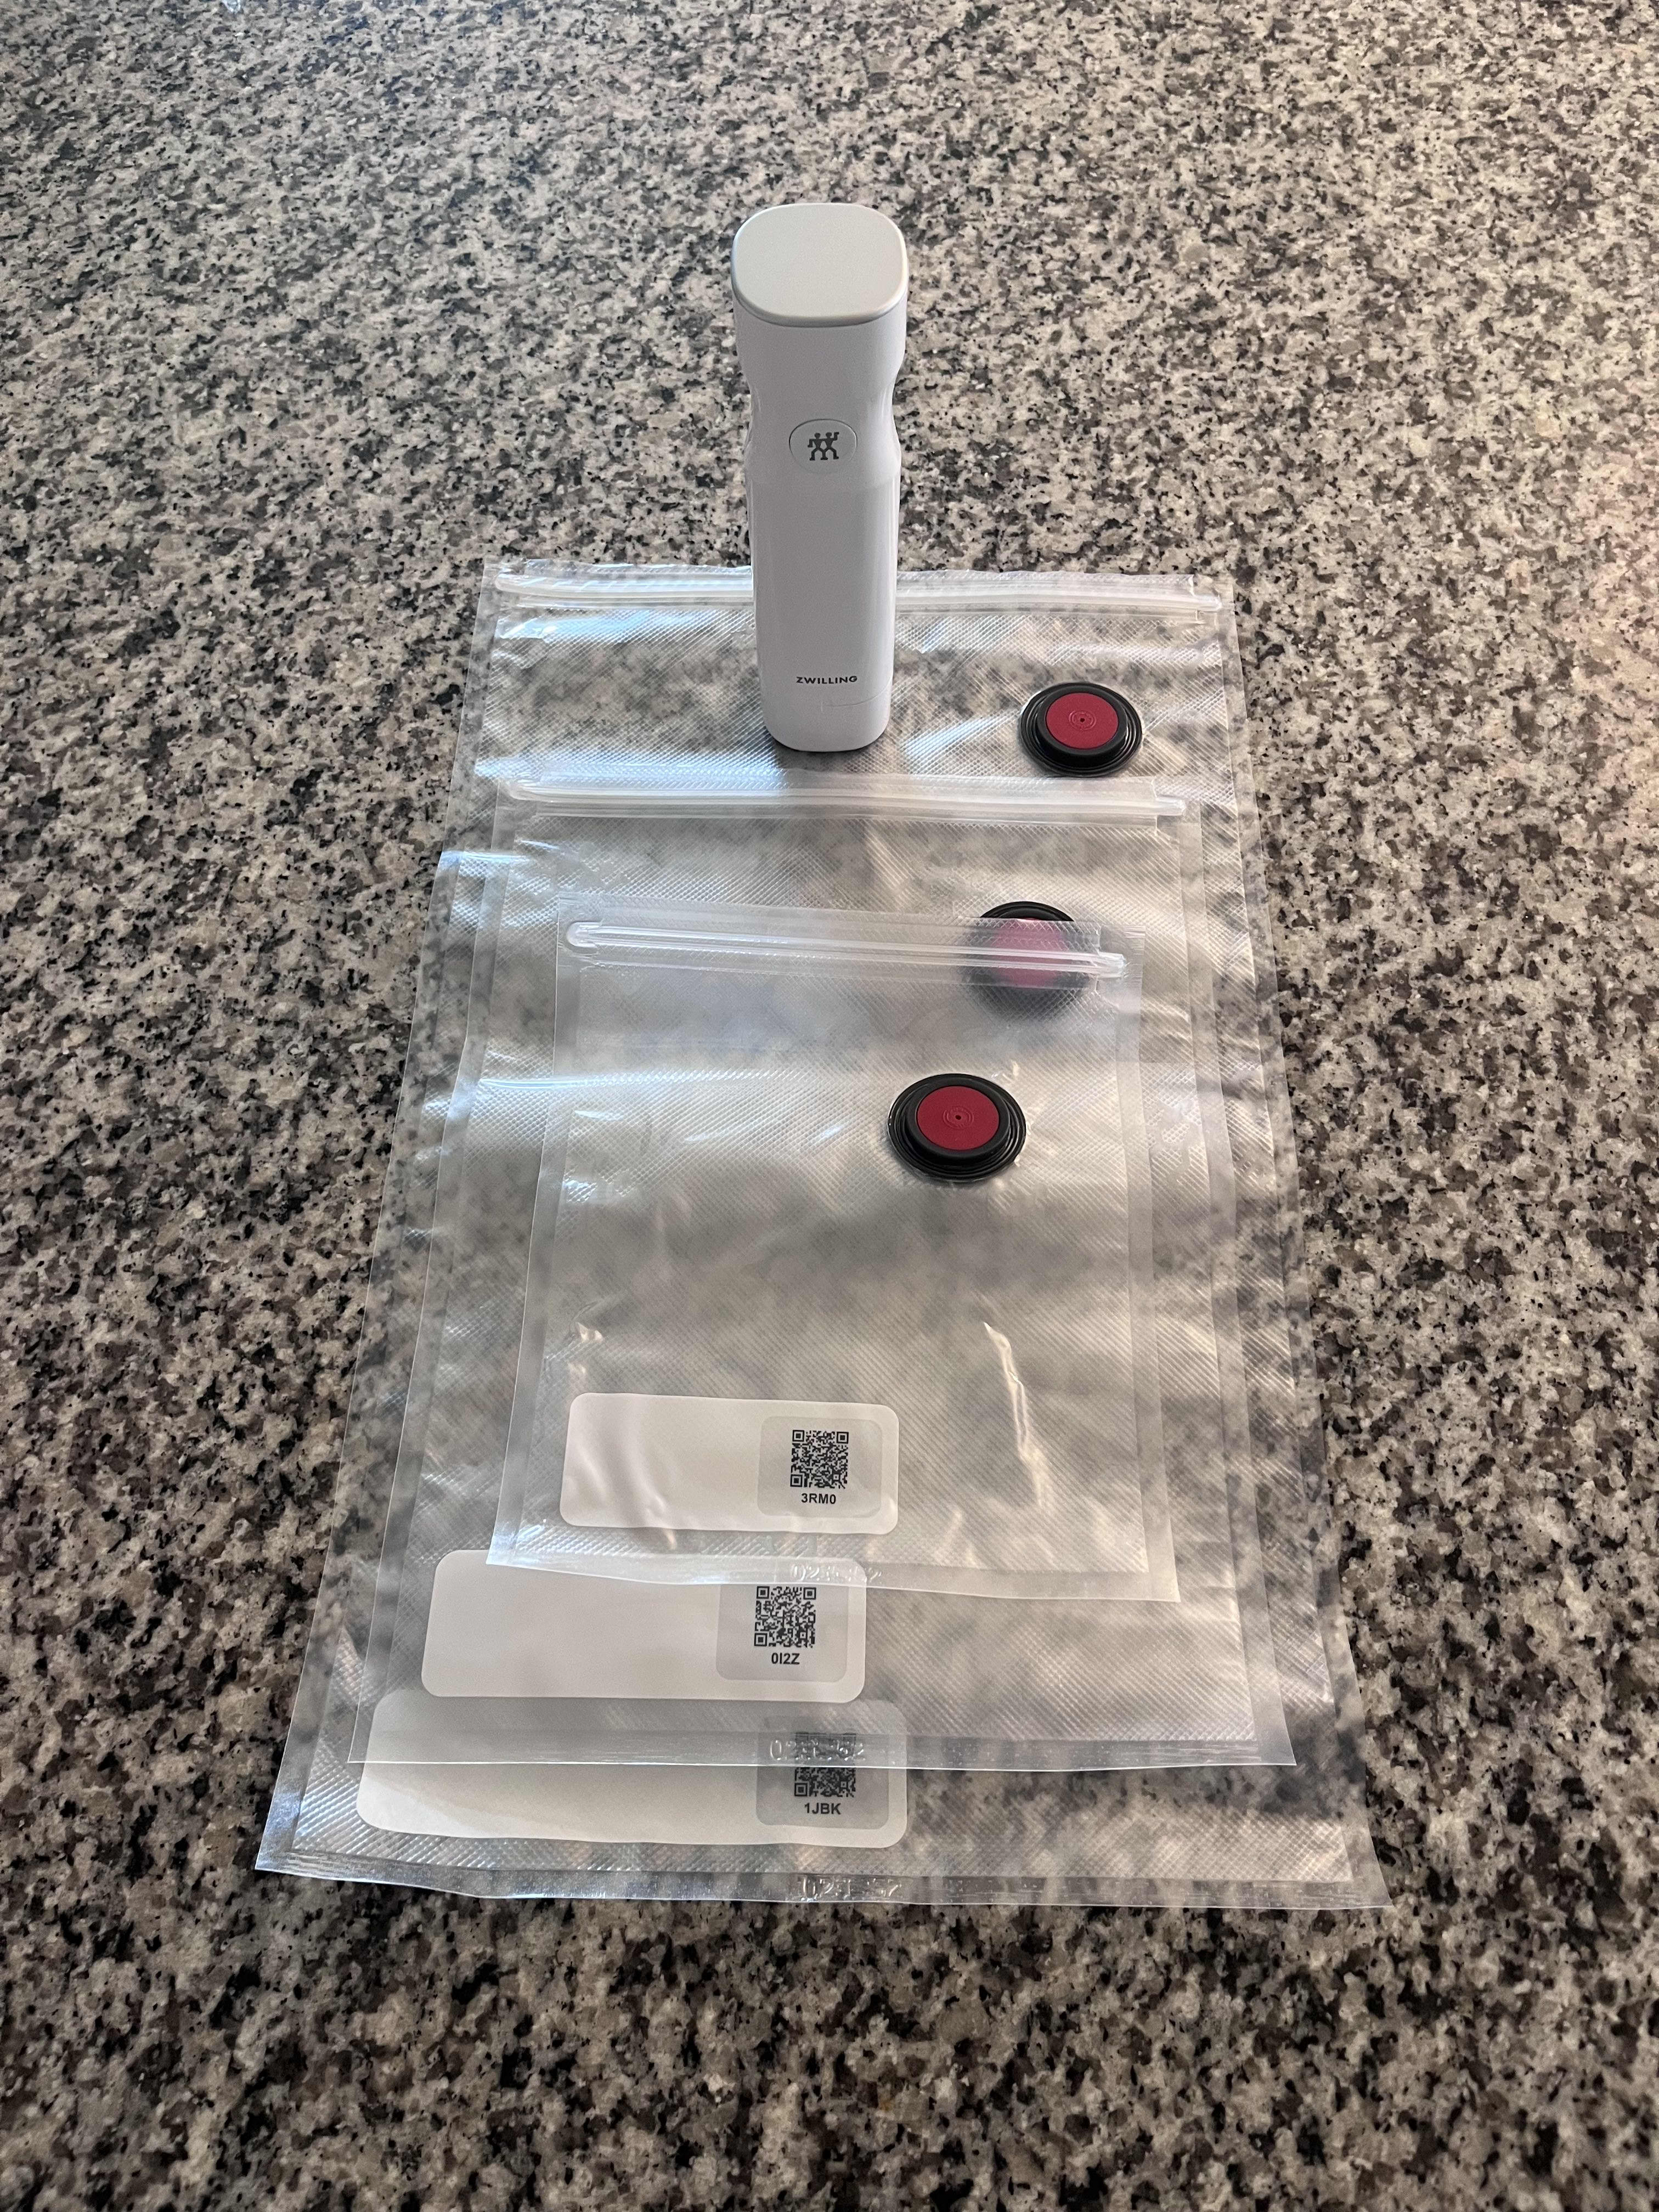 Zwilling Fresh & Save review: A great handheld vacuum sealer